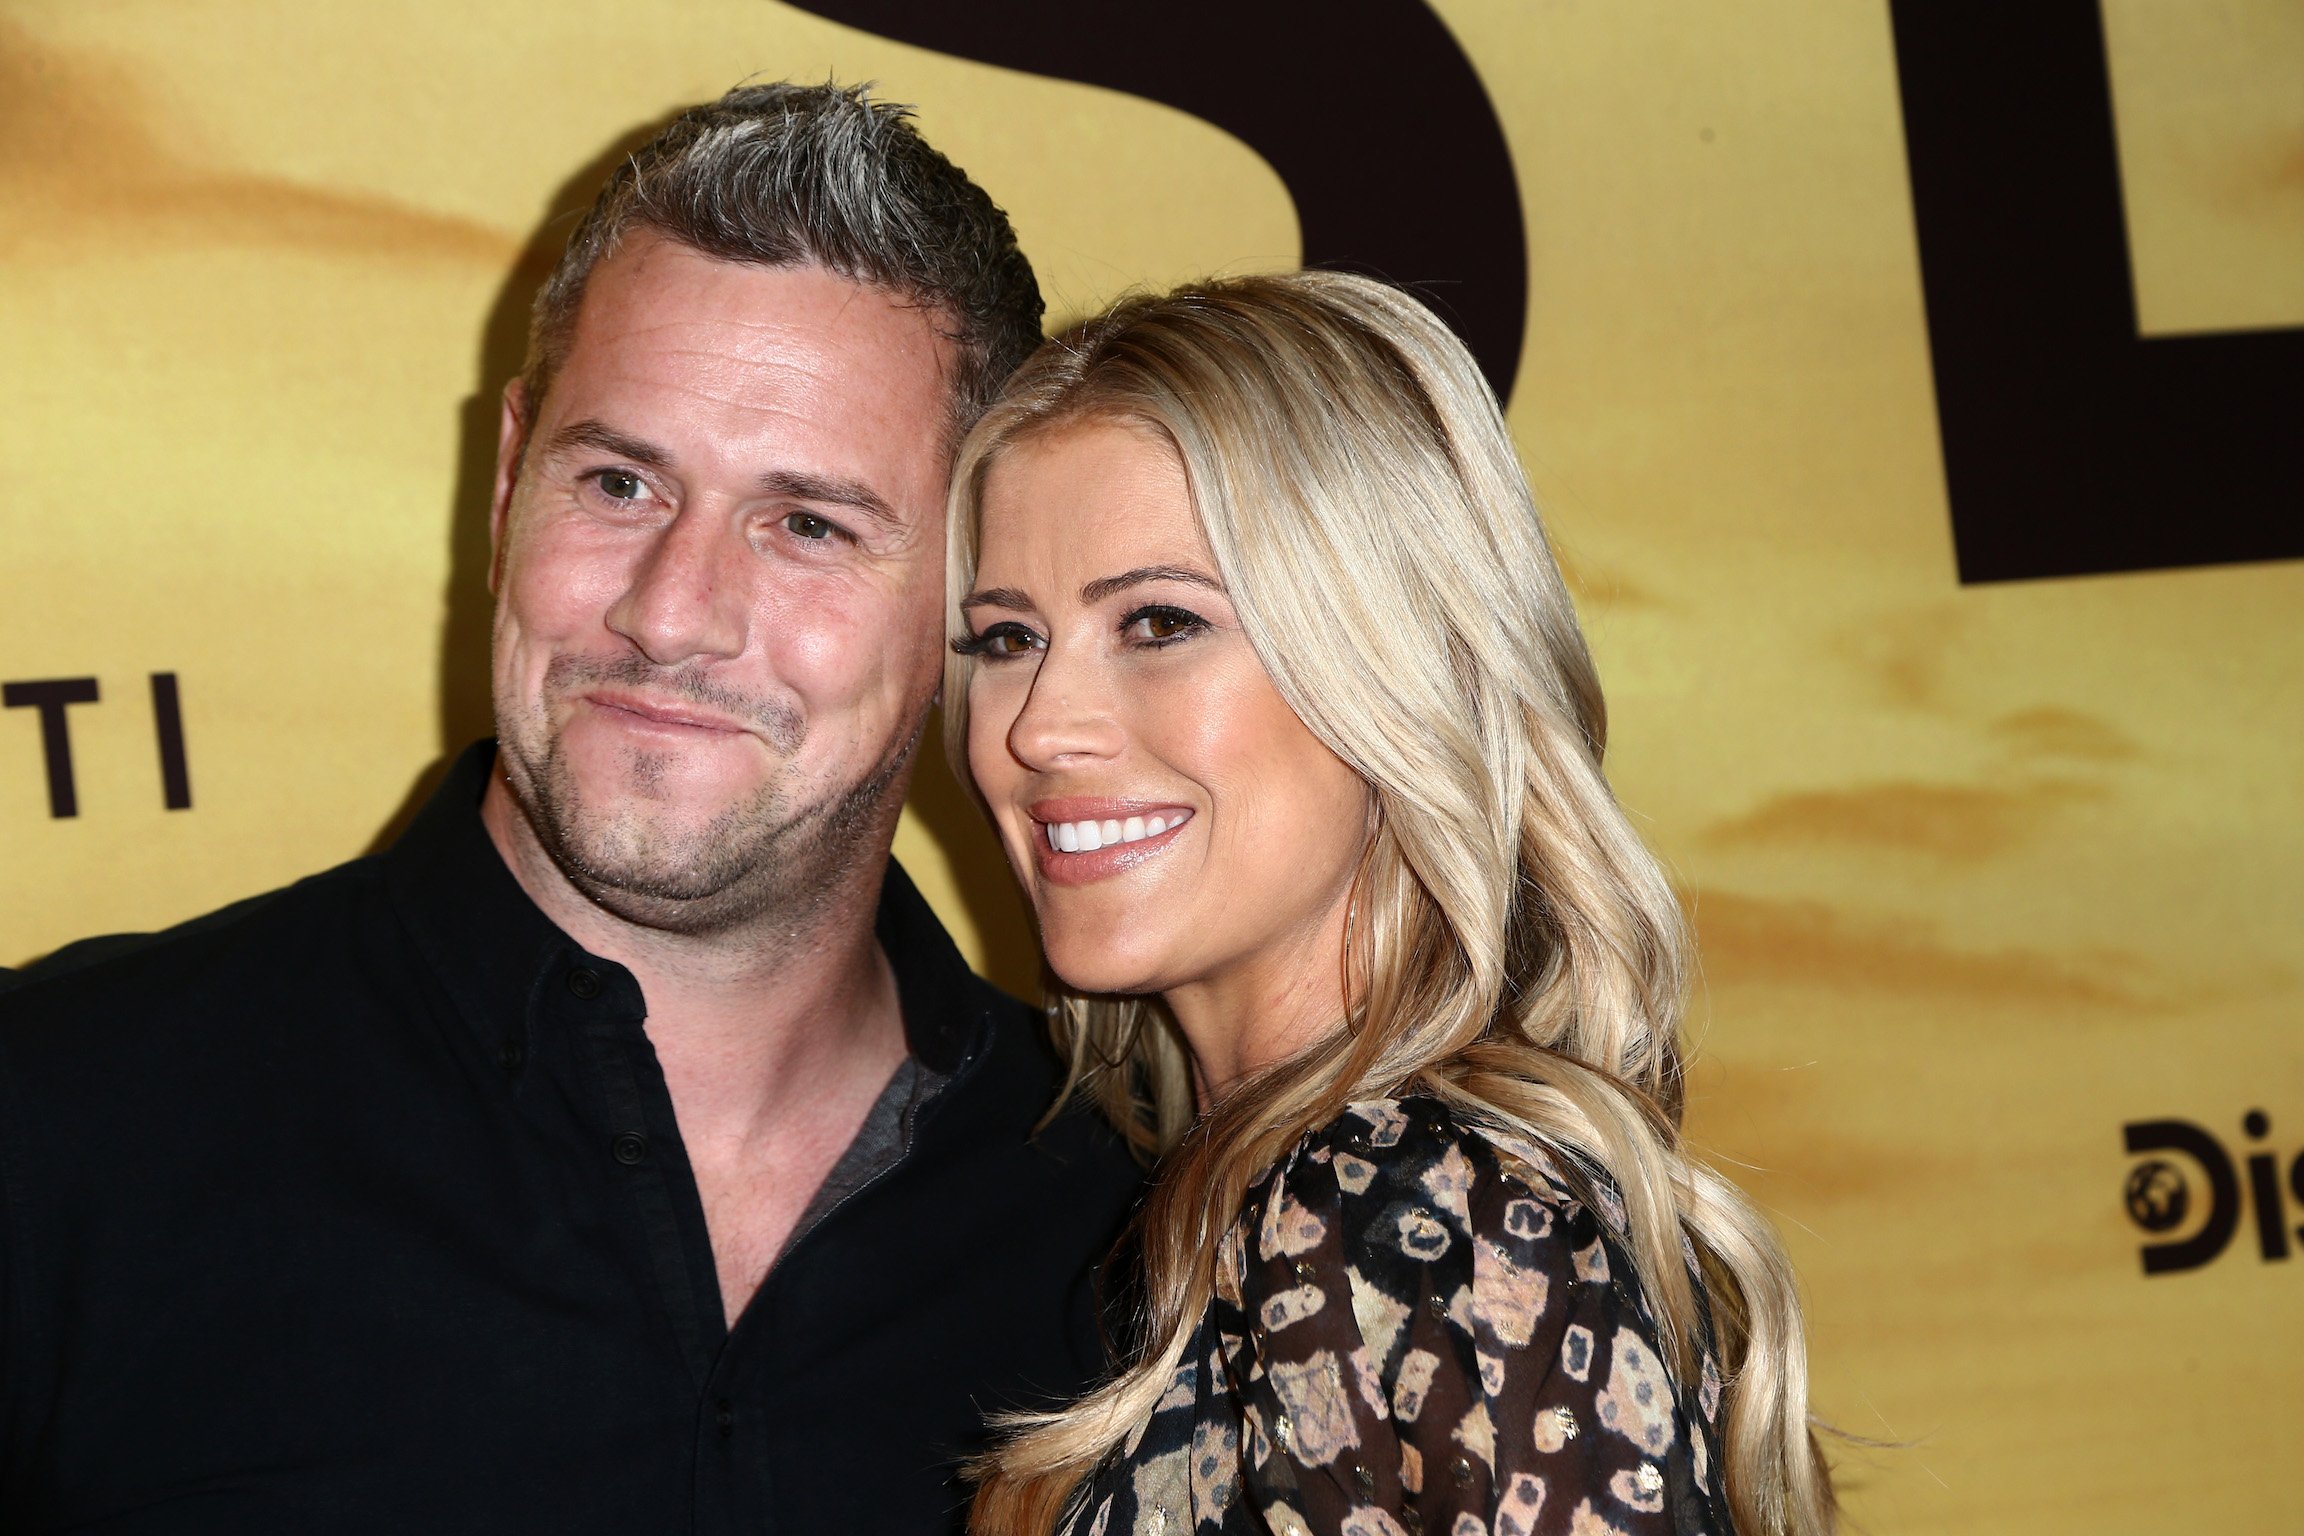 Ant Anstead smiling with ex-wife Christina Haack at a movie premiere before he started dating Renée Zellweger